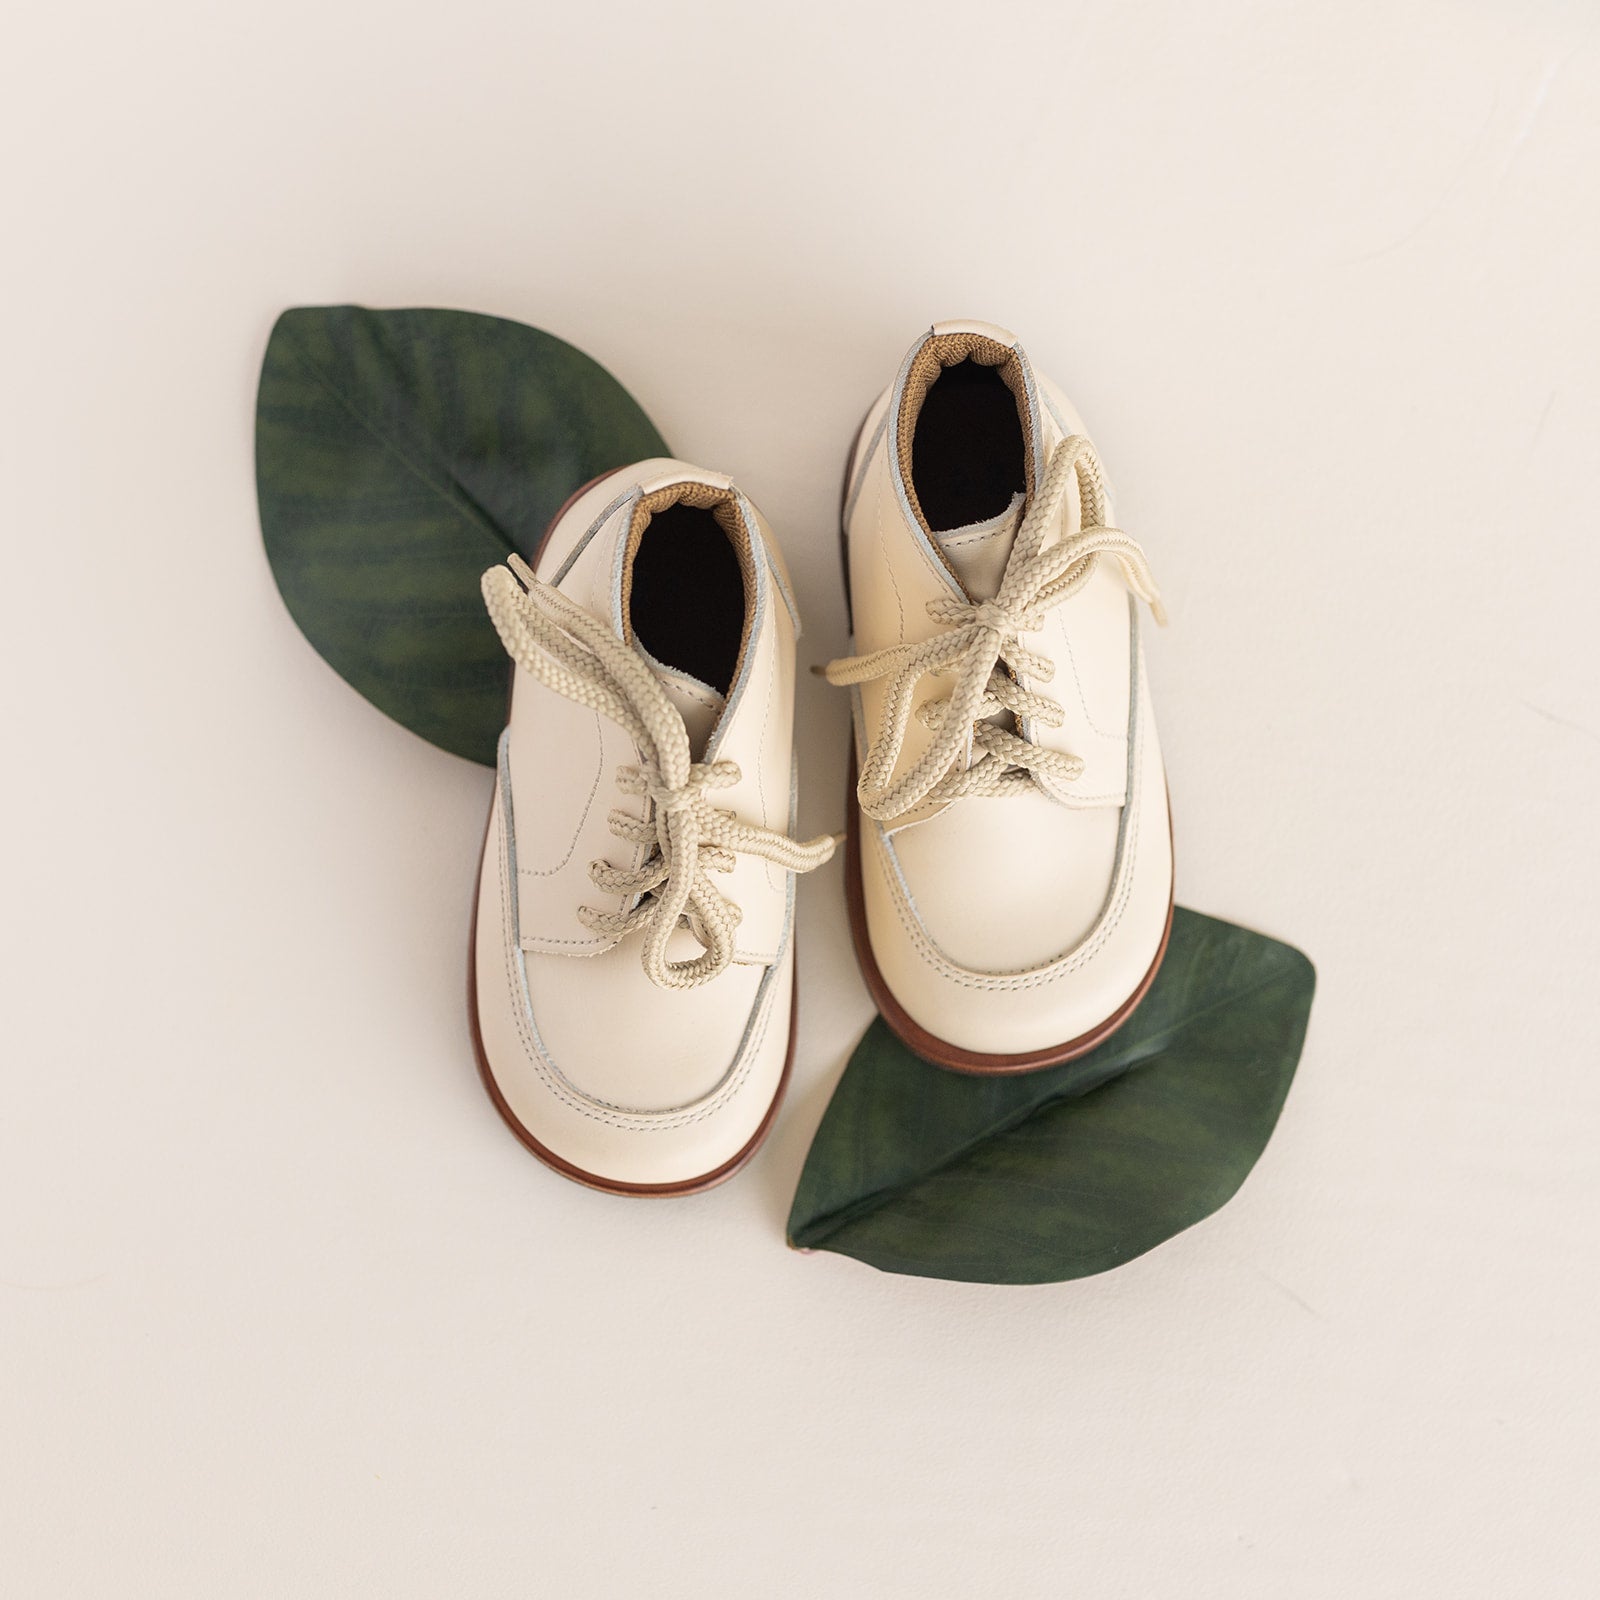 Adelisa & Co cream leather boots for children. Unisex style.